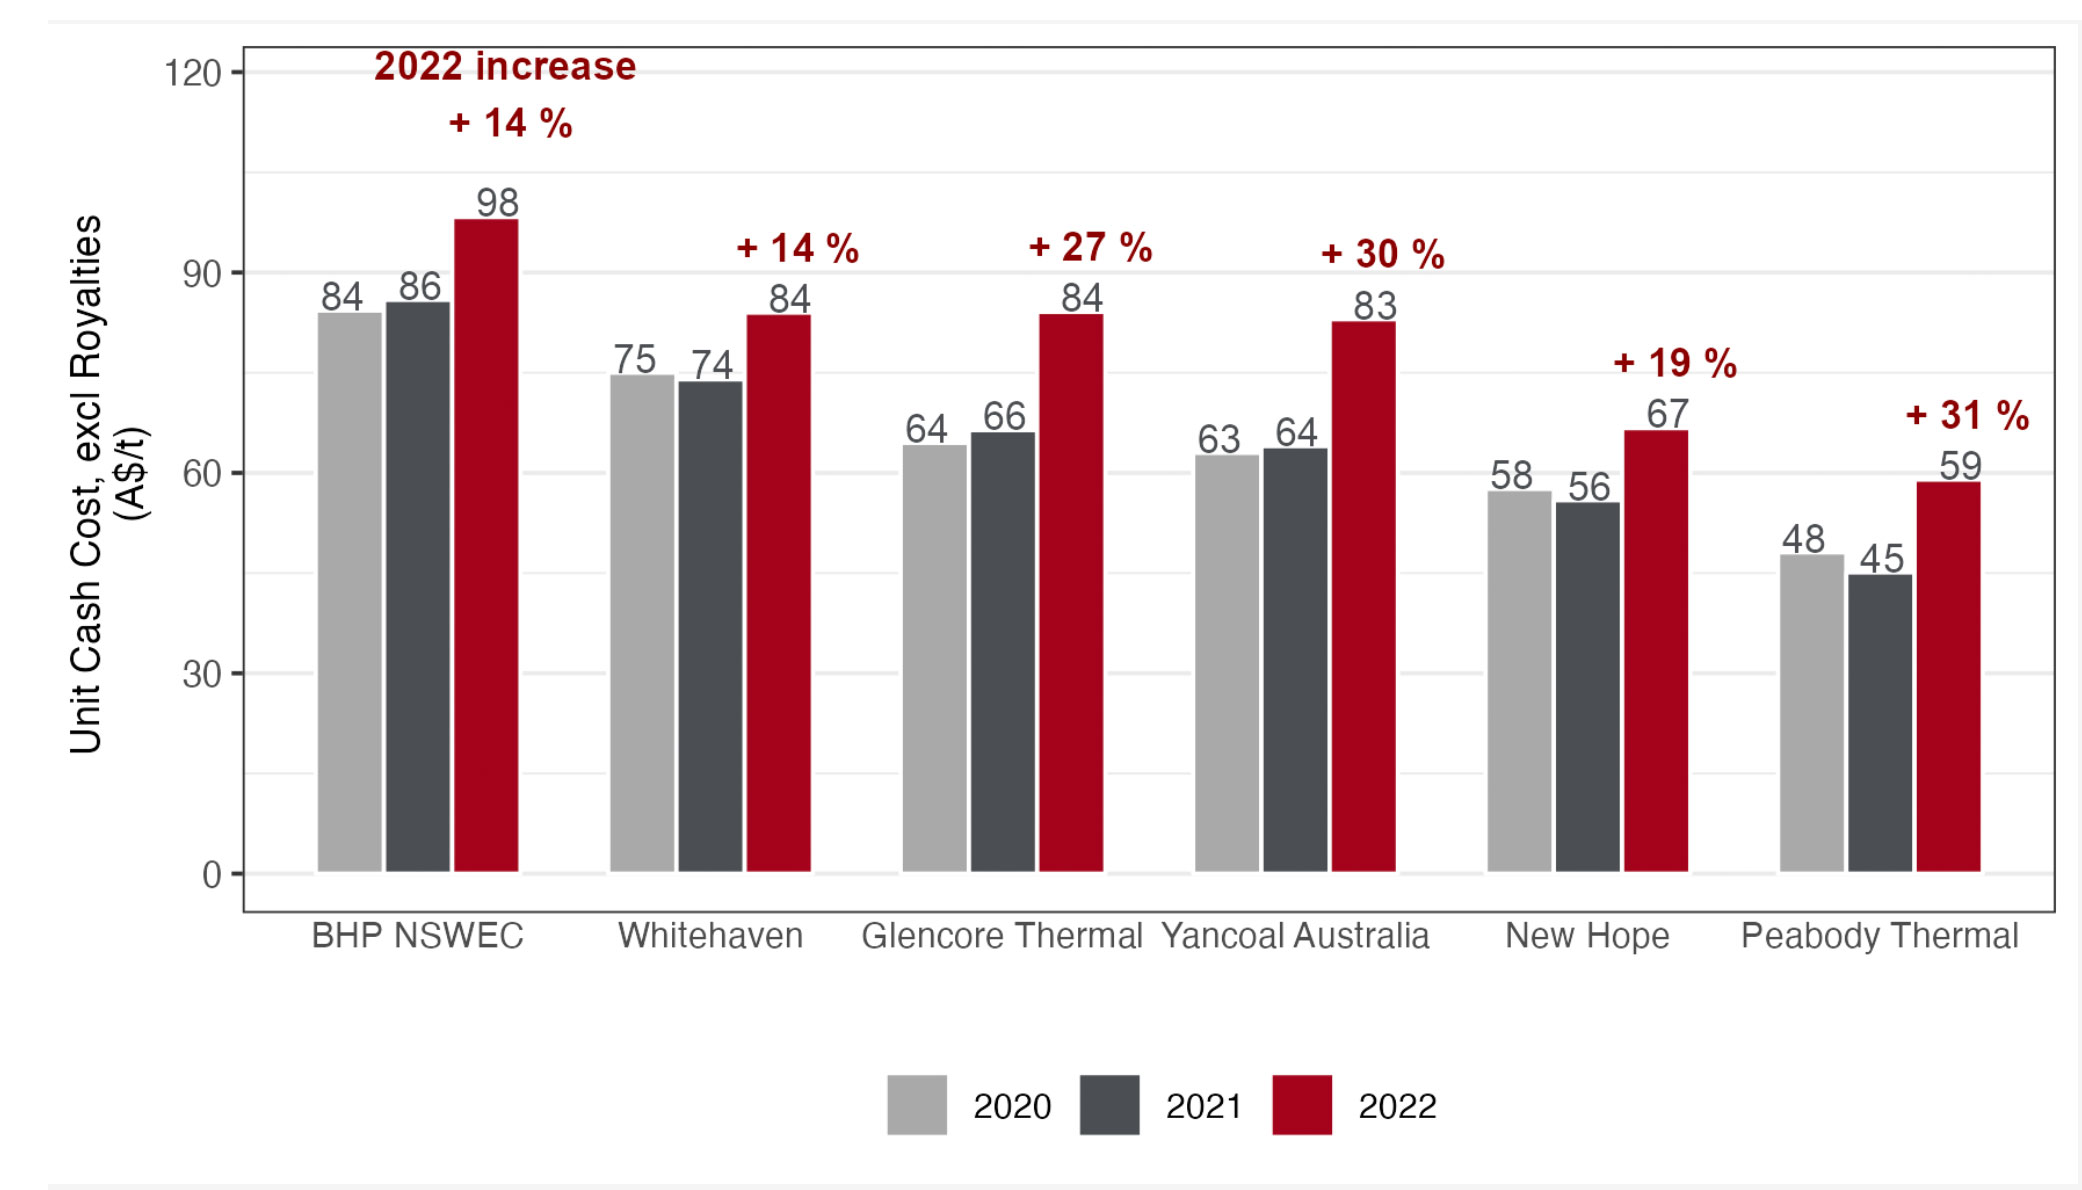 unit costs experienced by the top 6 thermal coal miners in Australia